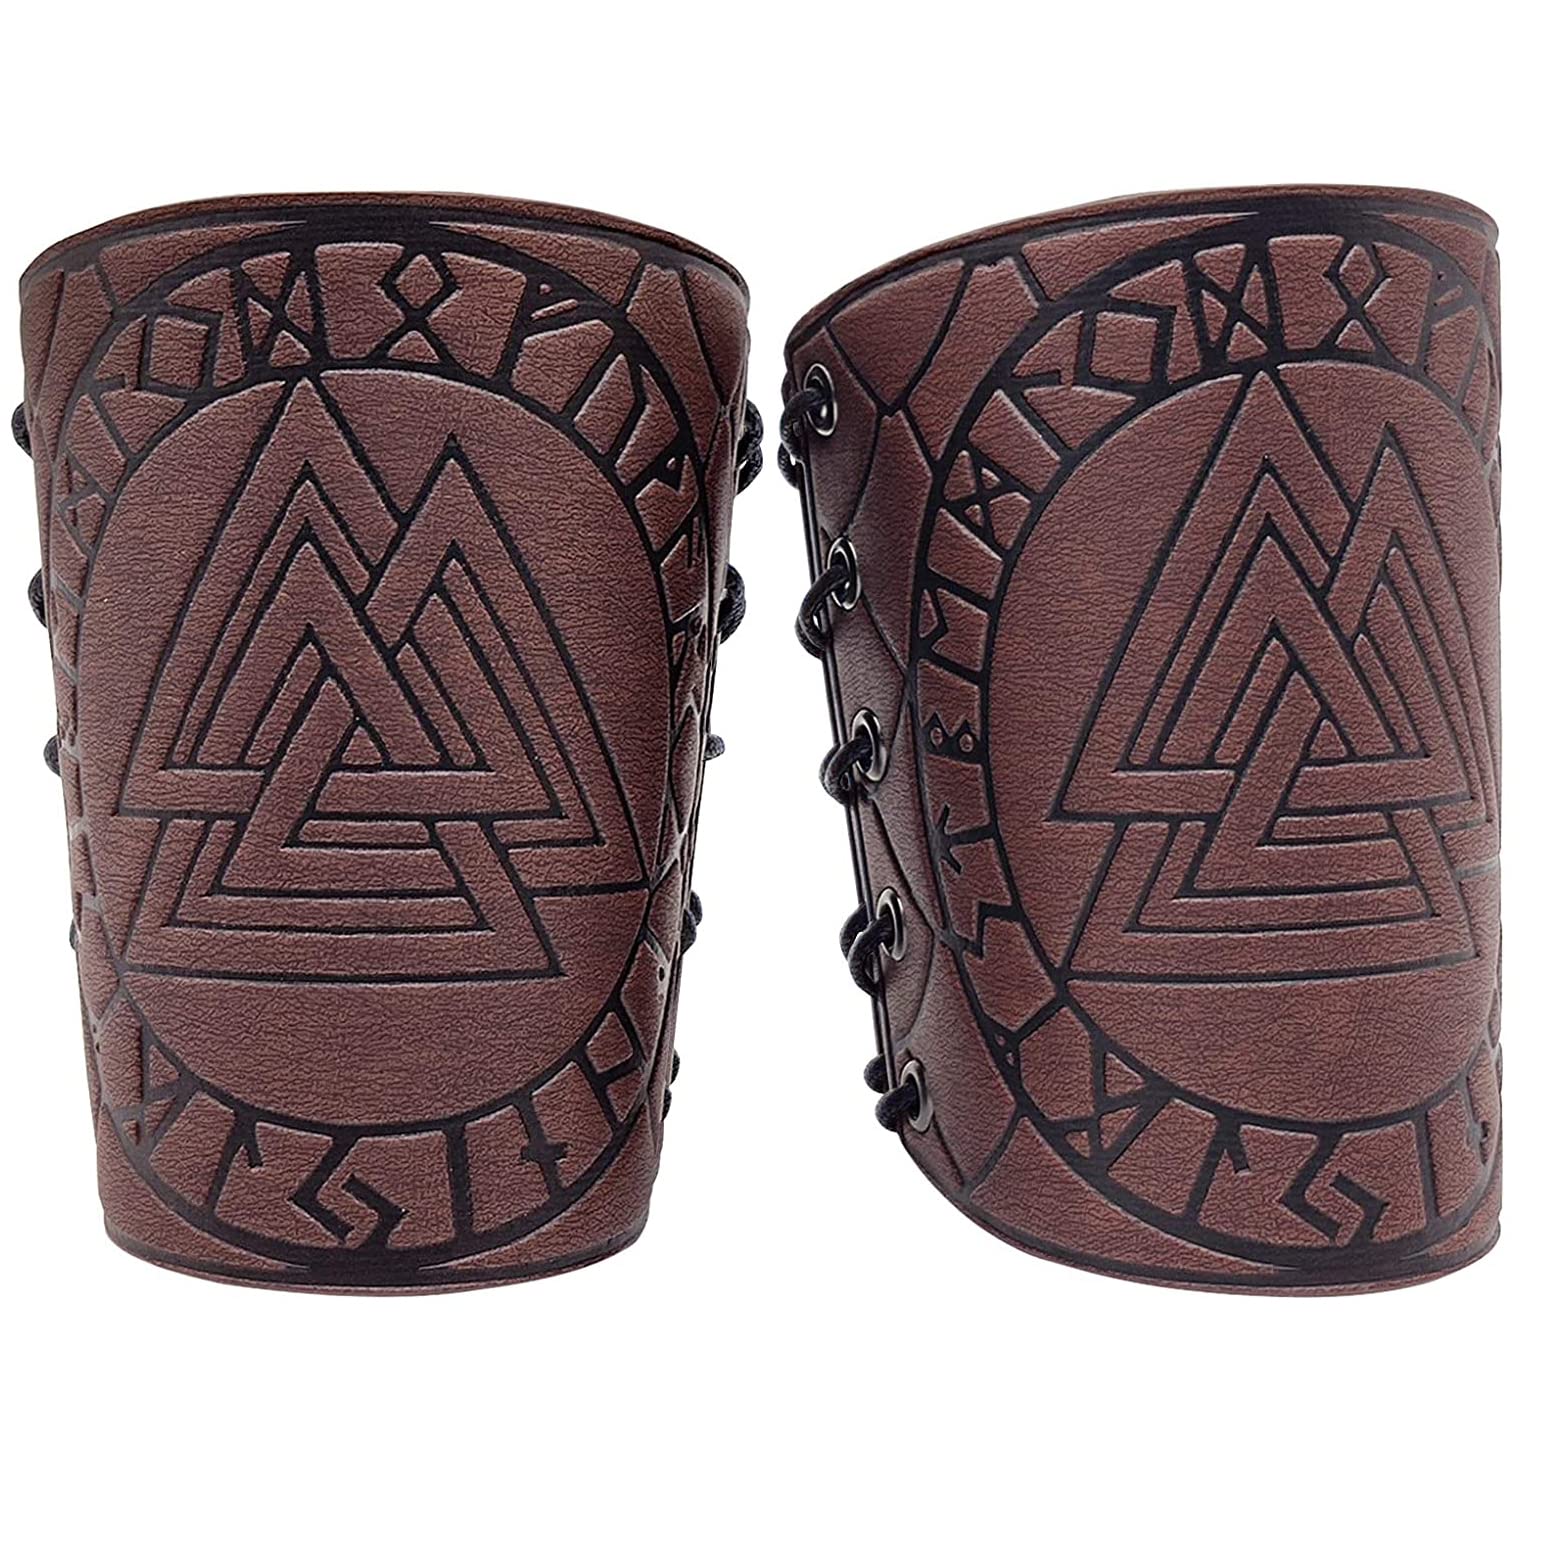 2pc Viking Bracers Genuine Leather Medieval Knight Watch Armor